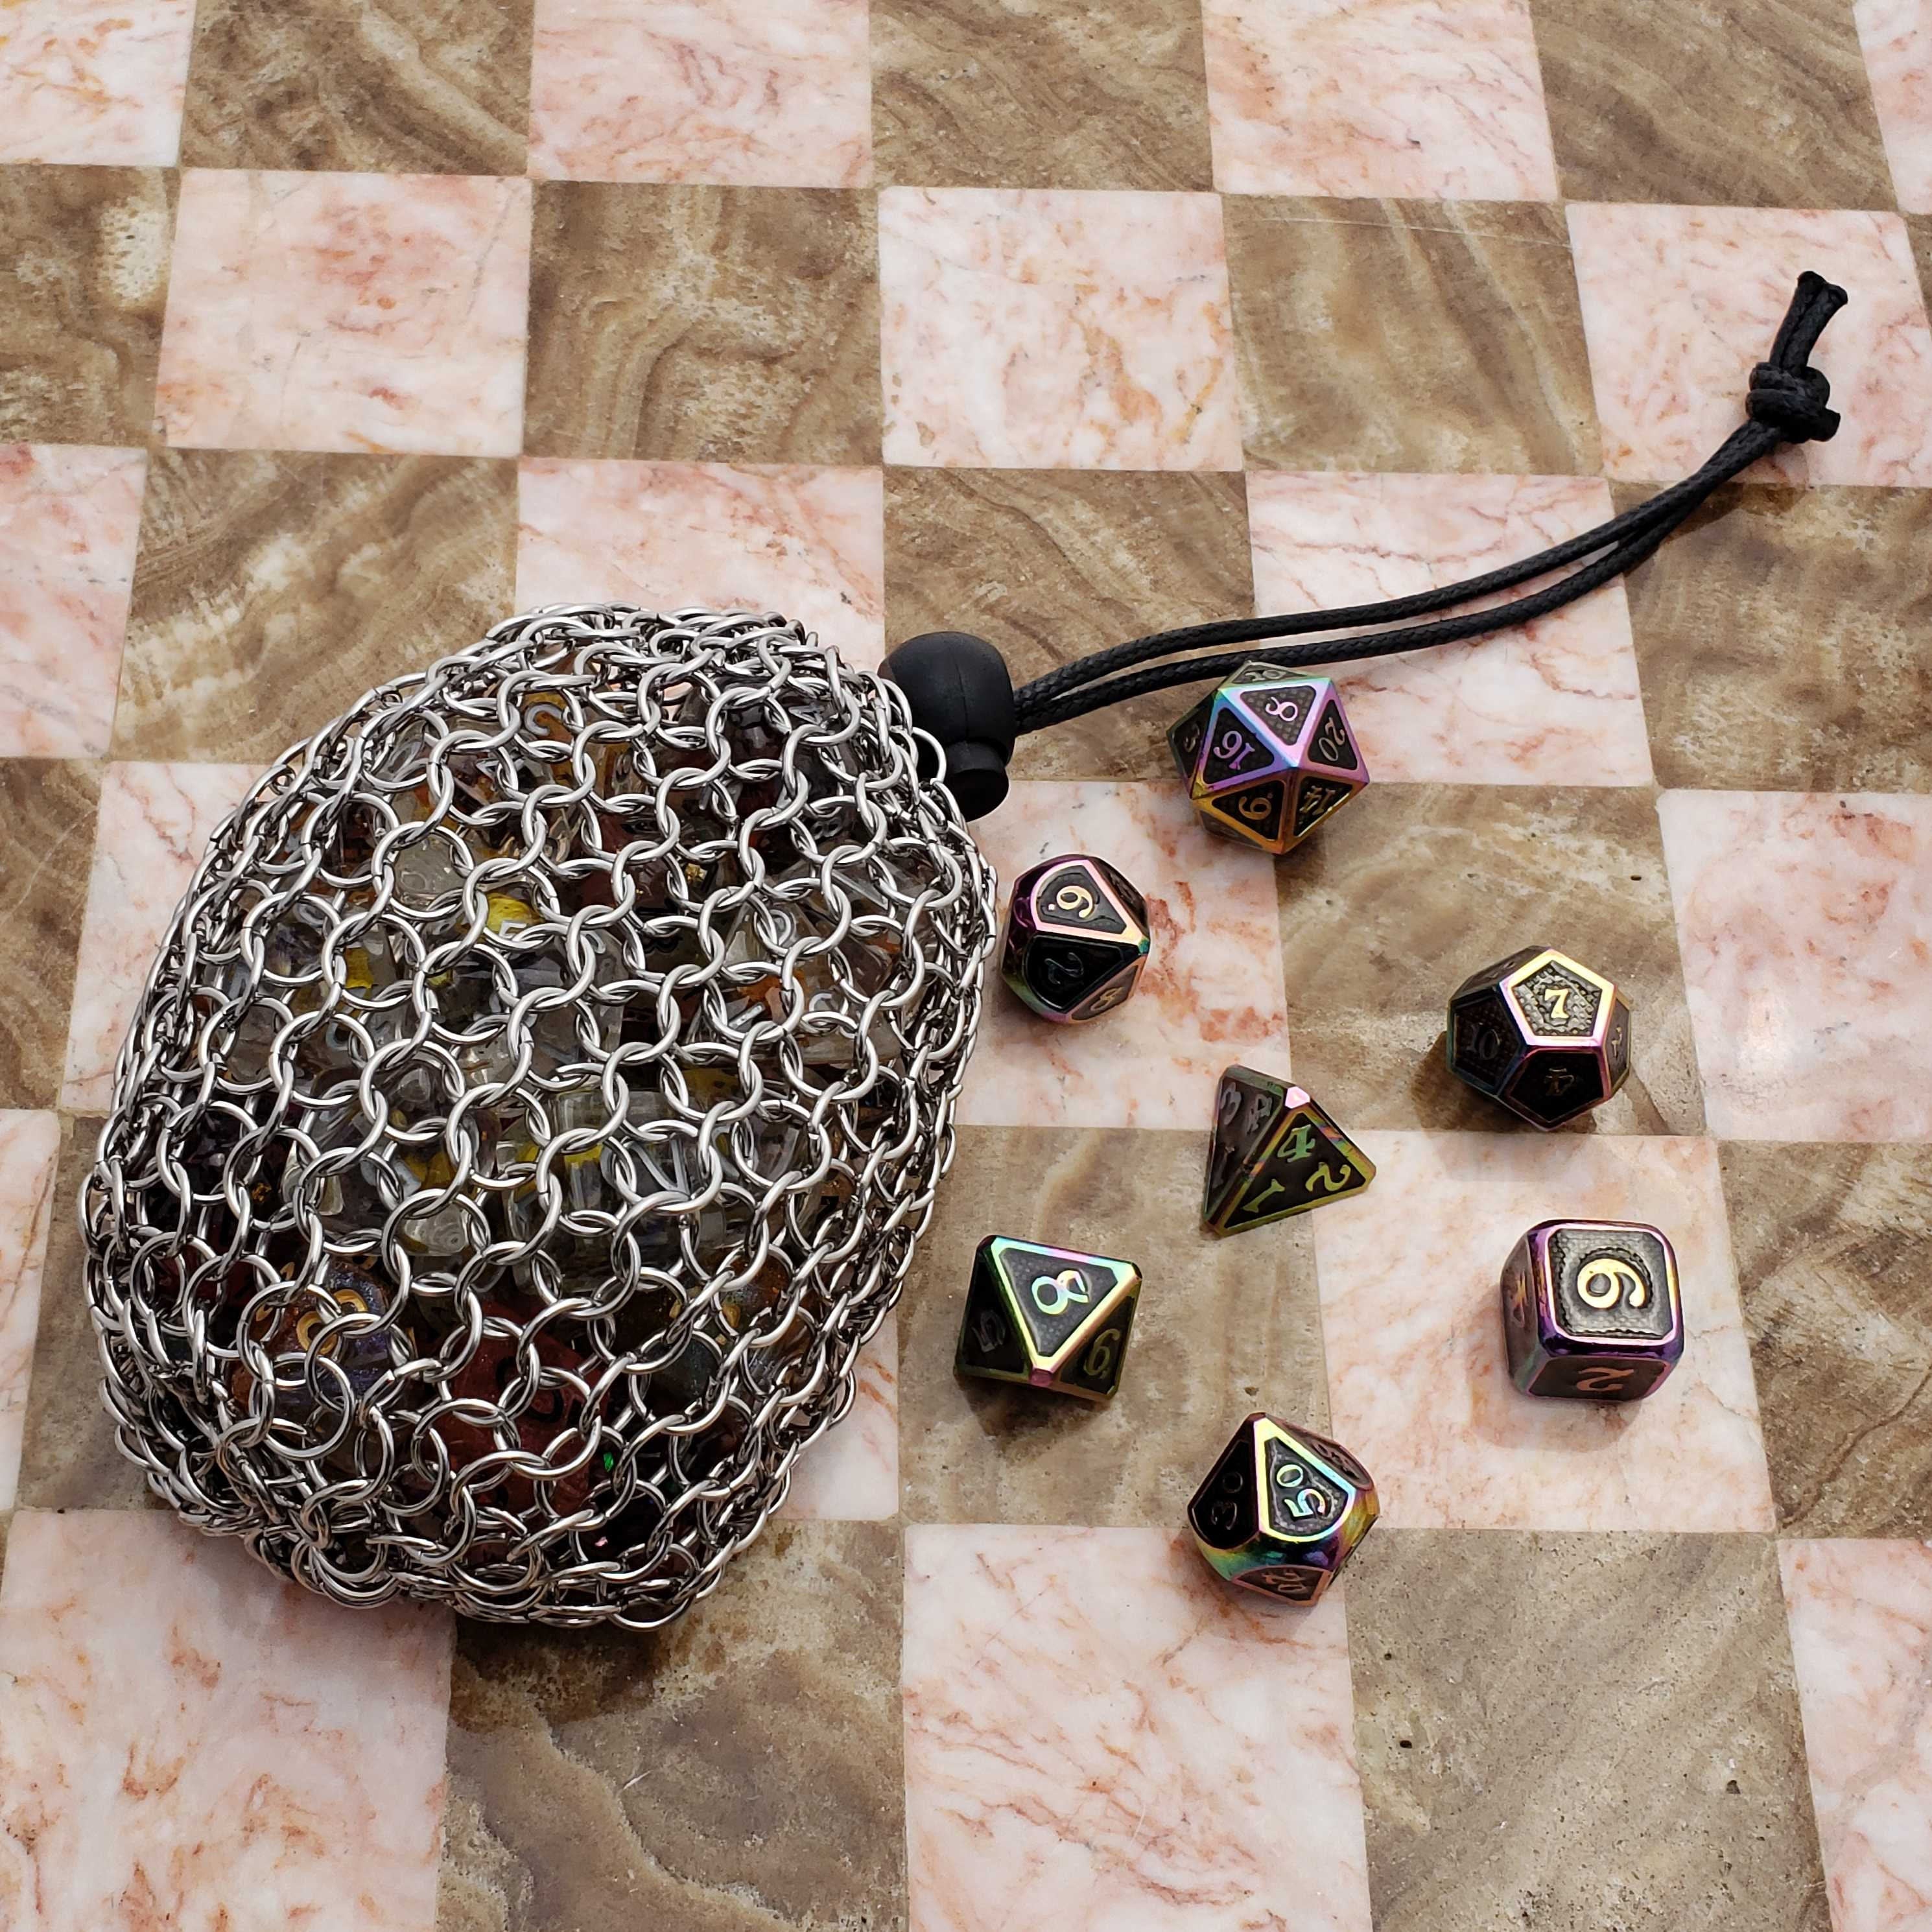 Steel Chainmail Dice Bag / Belt Pouch for RPGs, LARP, Tabletop, Cosplay, Dungeons and Dragons, Pathfinder, 5E, and more